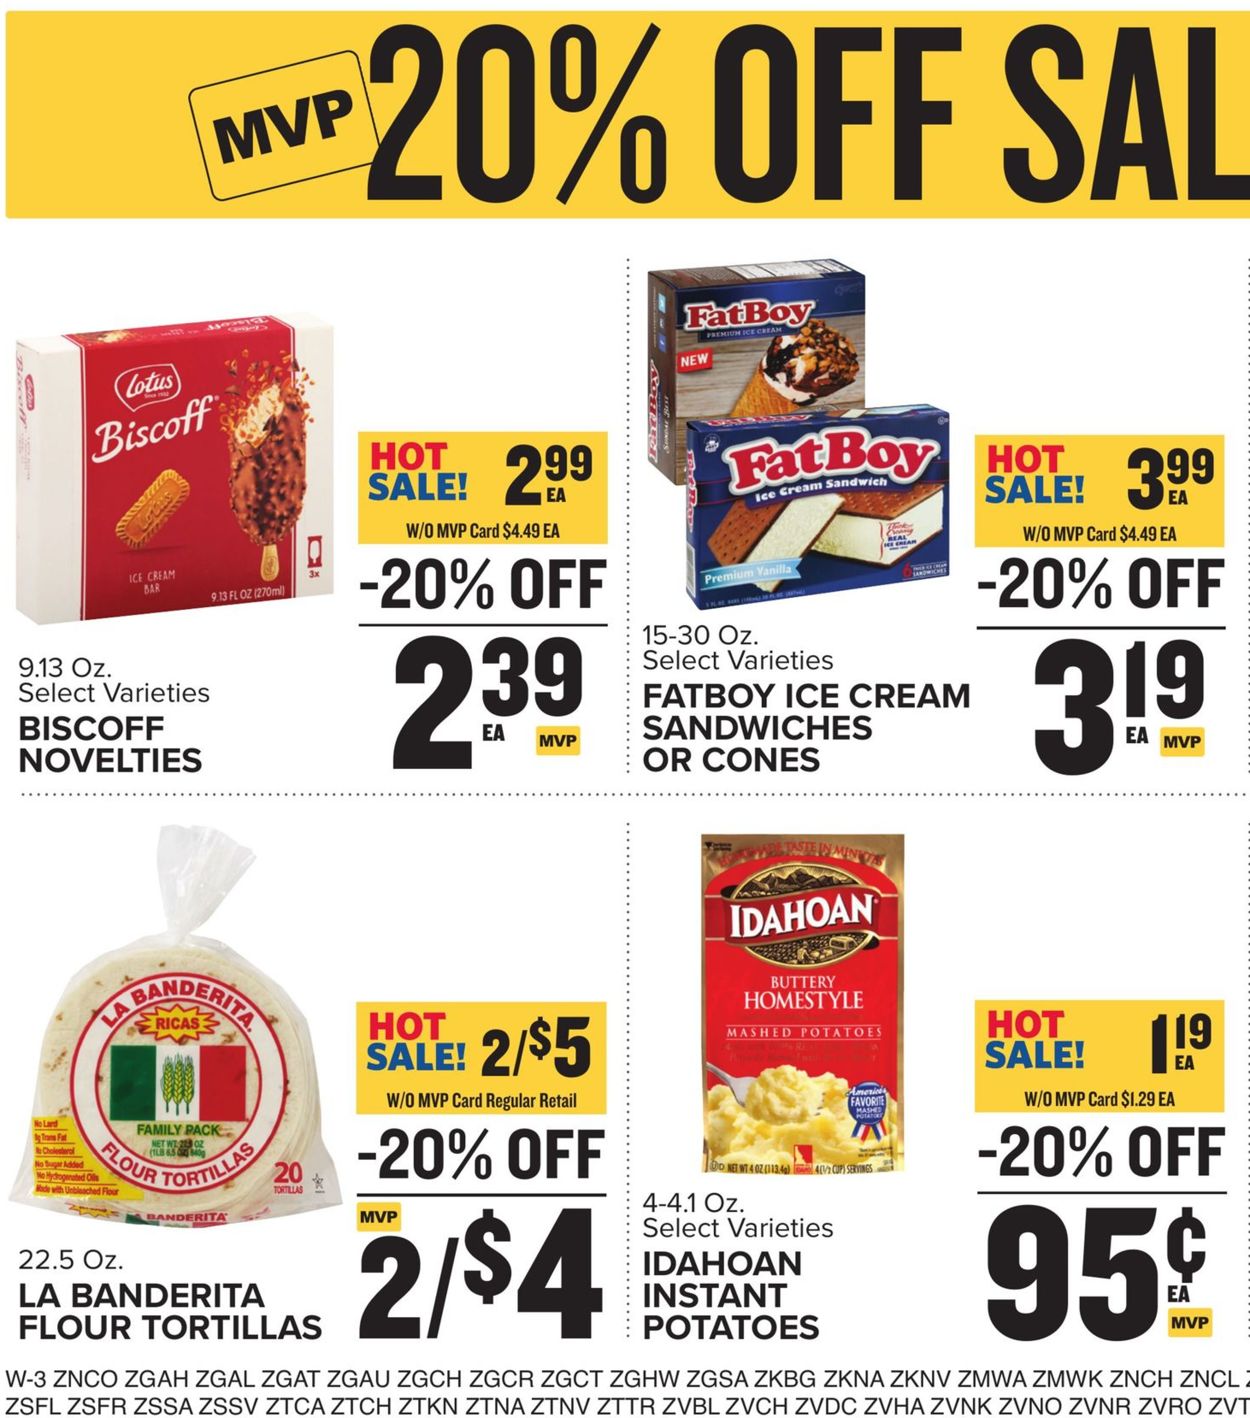 Food Lion Ad from 07/20/2022